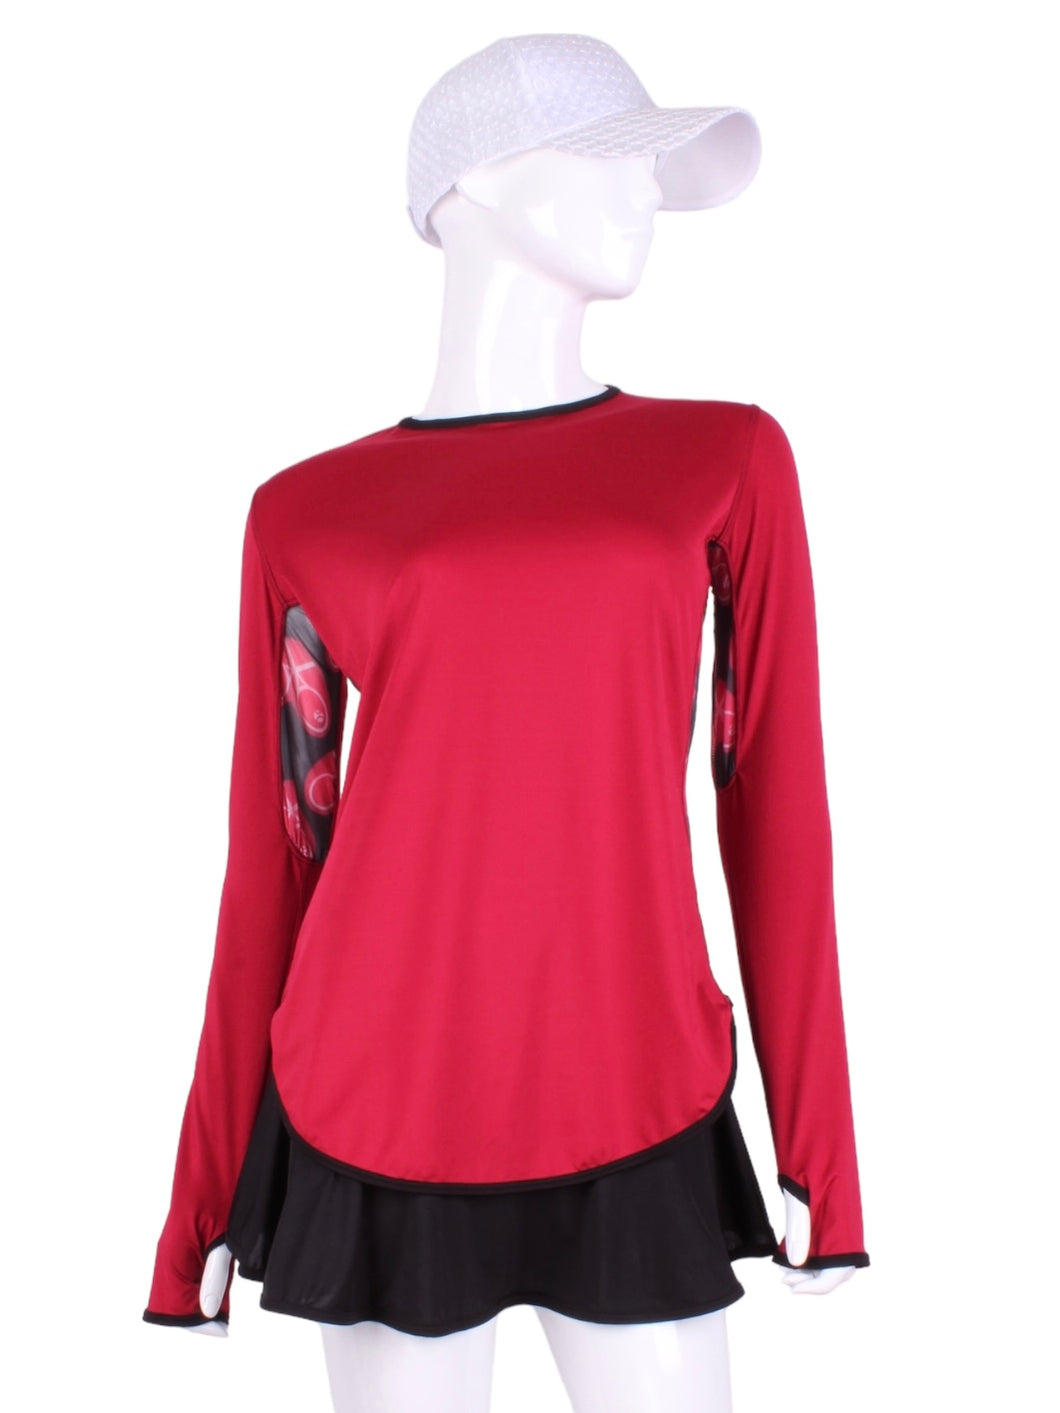 Soft Red Long Sleeve Crew Tee with Heart Trim. The most coverage of all my tops - with the Long Sleeve Crew Tee you can cover your chest AND your arms and back of hands thanks to the thumb hole.  However - you still stay cool!  I designed this top to look flattering AND allow maximum air flow through my mesh back and side panels.  The harder you play - the more SWOOSH OF AIR FLOW you create.  Be your own FAN.  Literally.  Keep cool.  Keep shaded.  Keep dry.  Look awesome.